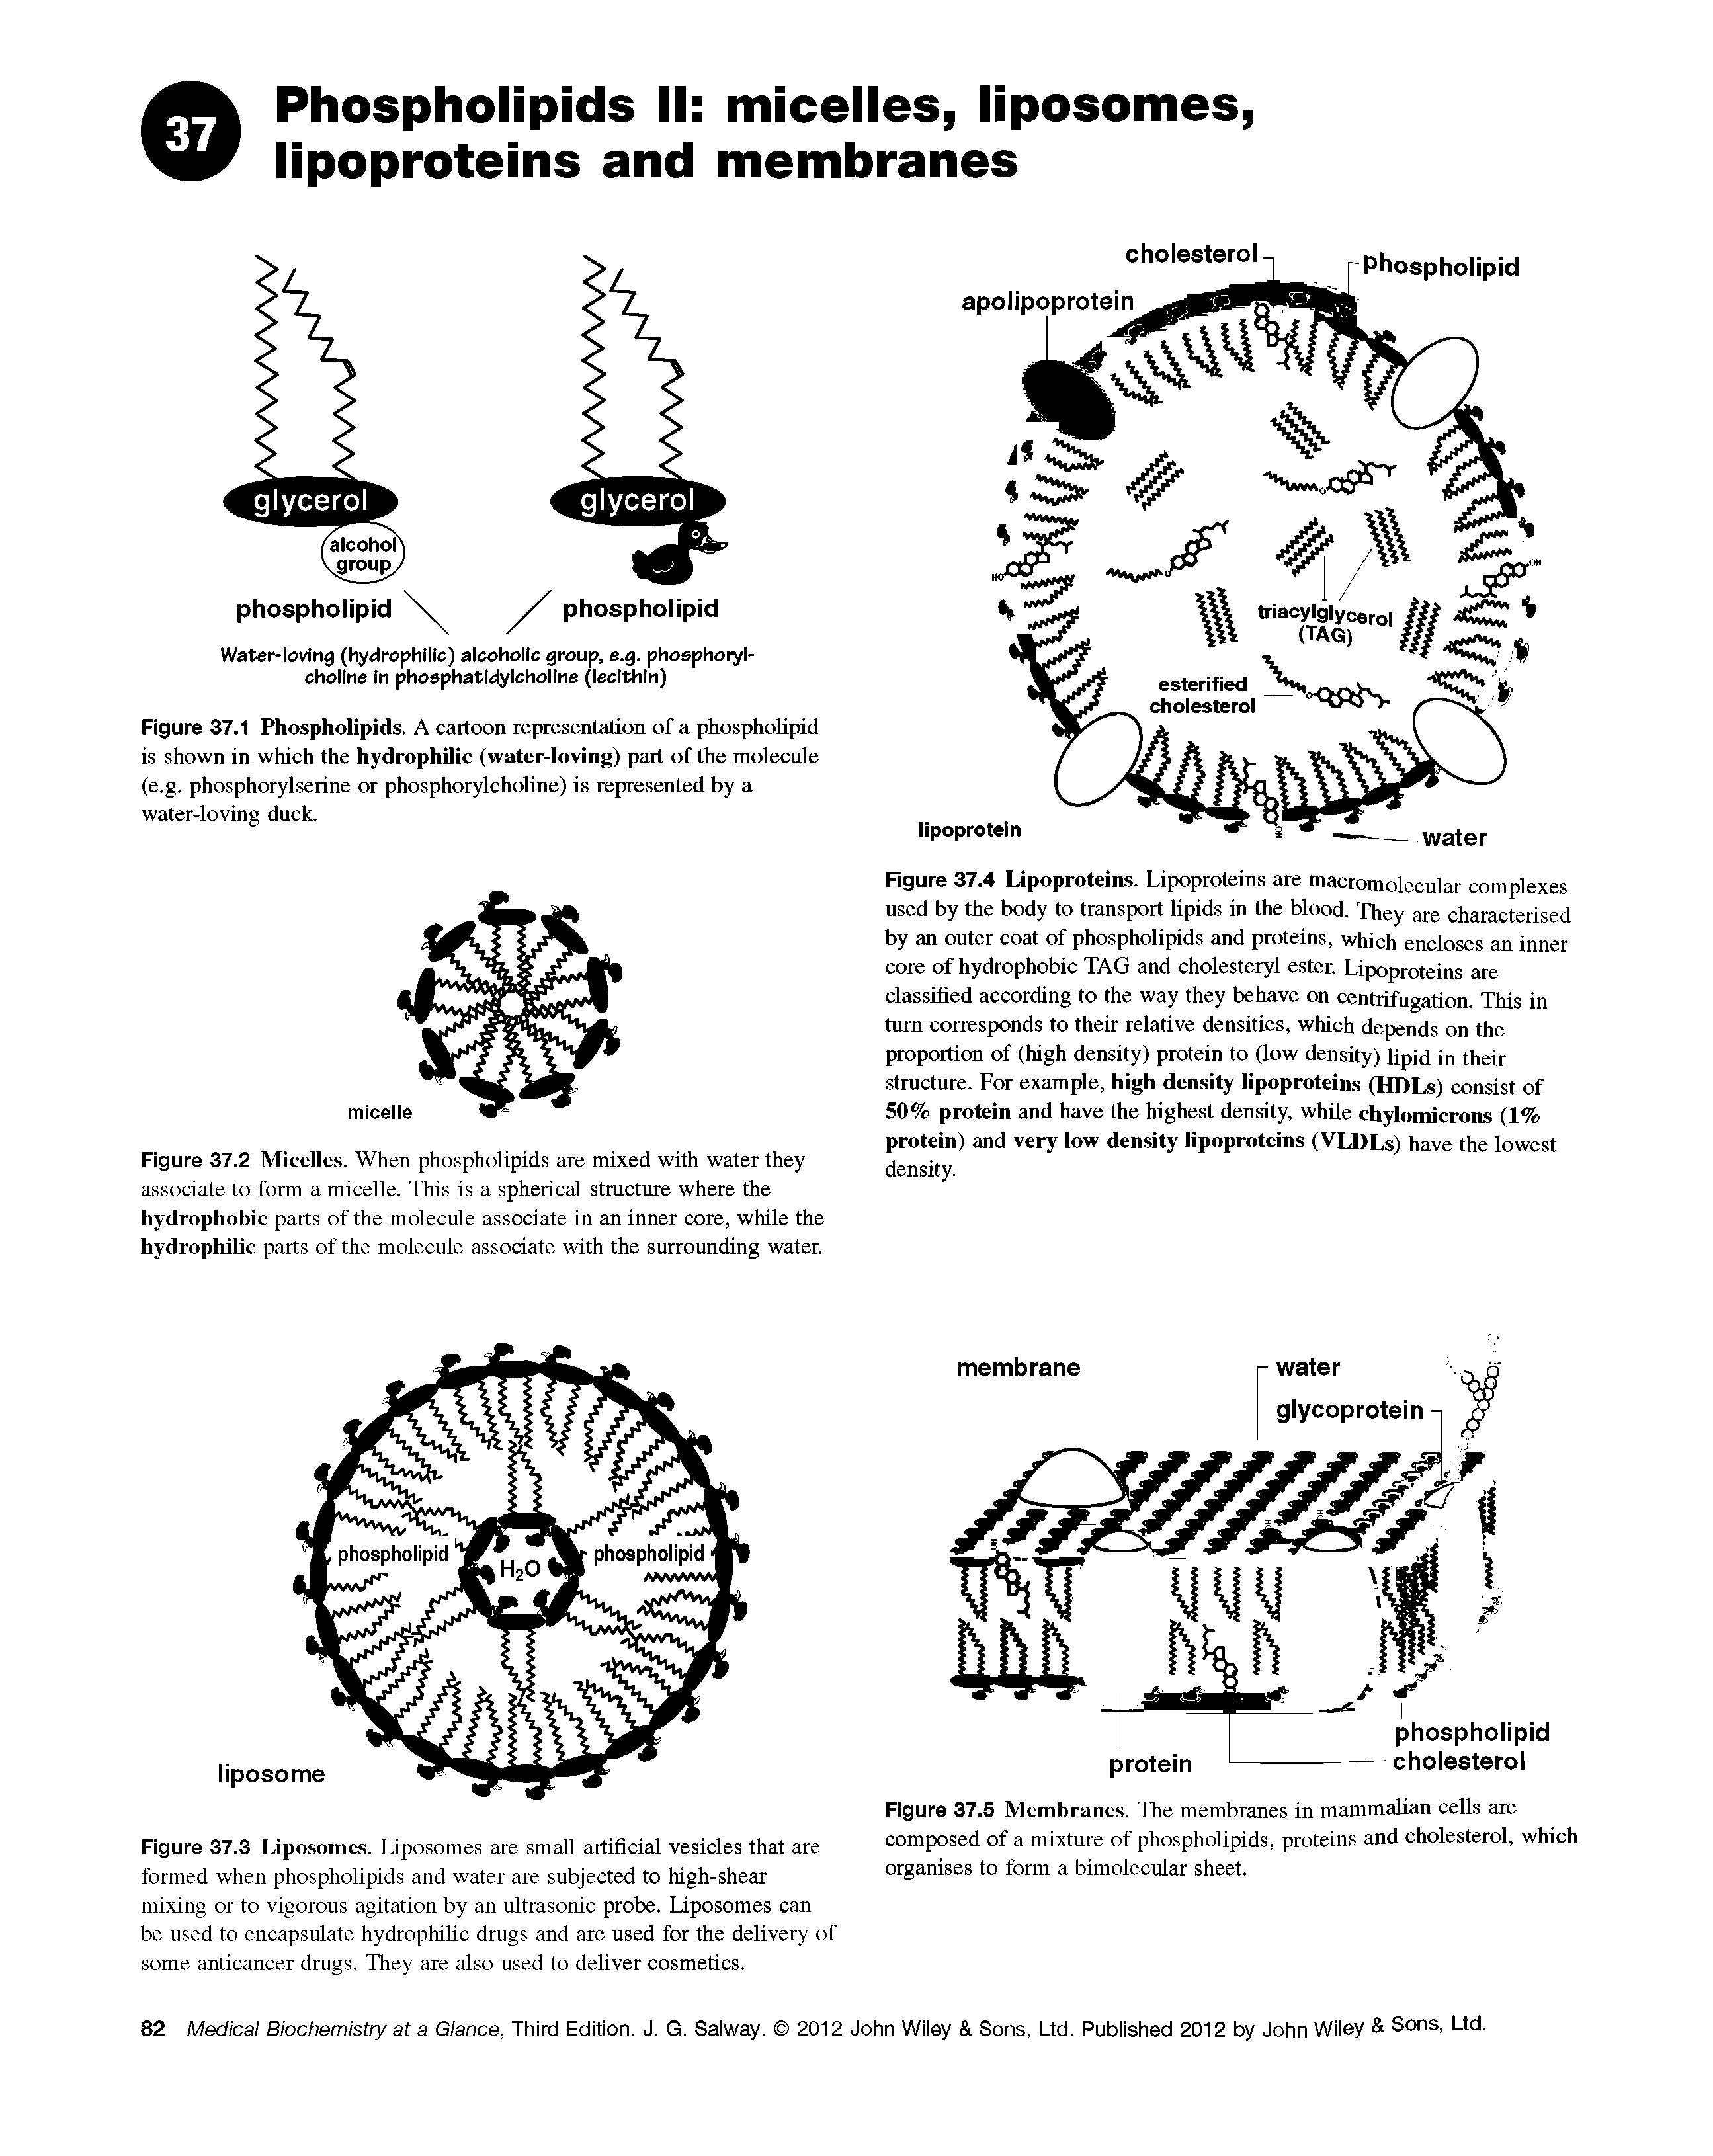 Figure 37.3 Liposomes. Liposomes are small artificial vesicles that are formed when phospholipids and water are subjected to high-shear mixing or to vigorous agitation by an ultrasonic probe. Liposomes can be used to encapsulate hydrophilic drugs and are used for the delivery of some anticancer drugs. They are also used to deliver cosmetics.